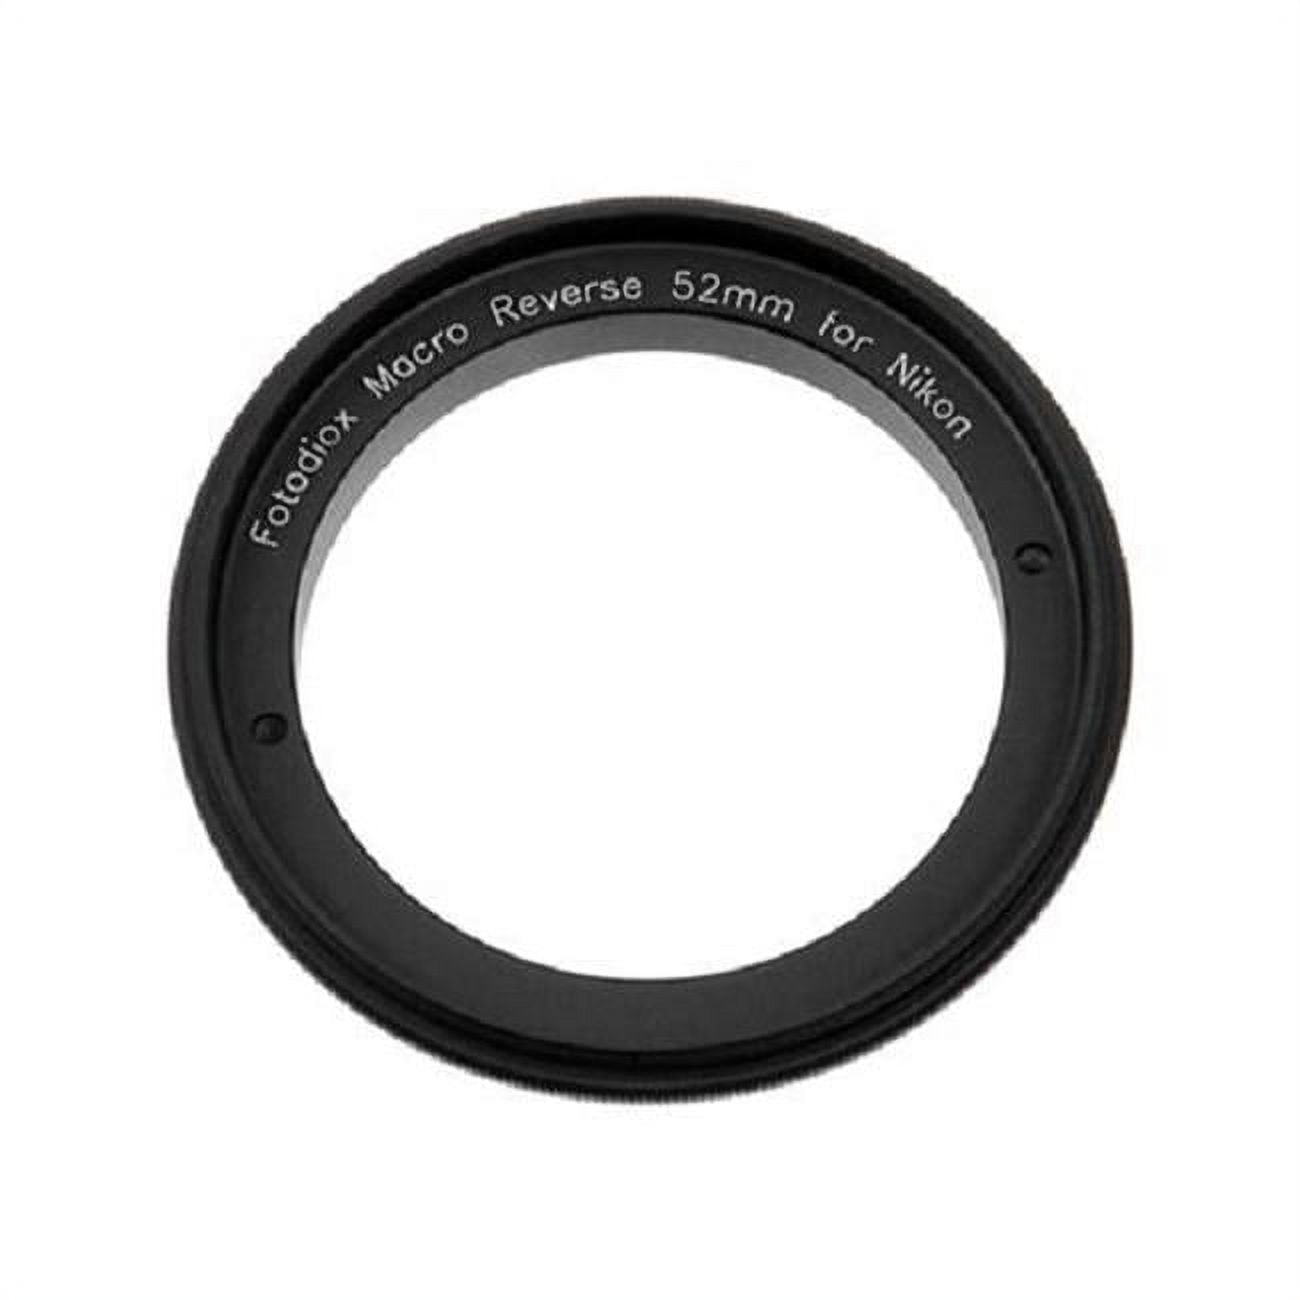 Amazon.com : Fotodiox 58mm Macro Reverse Ring Filter Kit Compatible with  58mm Filter Thread Lenses to Nikon F-Mount Cameras - with UV Filter,  Mechanical Aperture Control Adapter, and Cap : Camera Lens